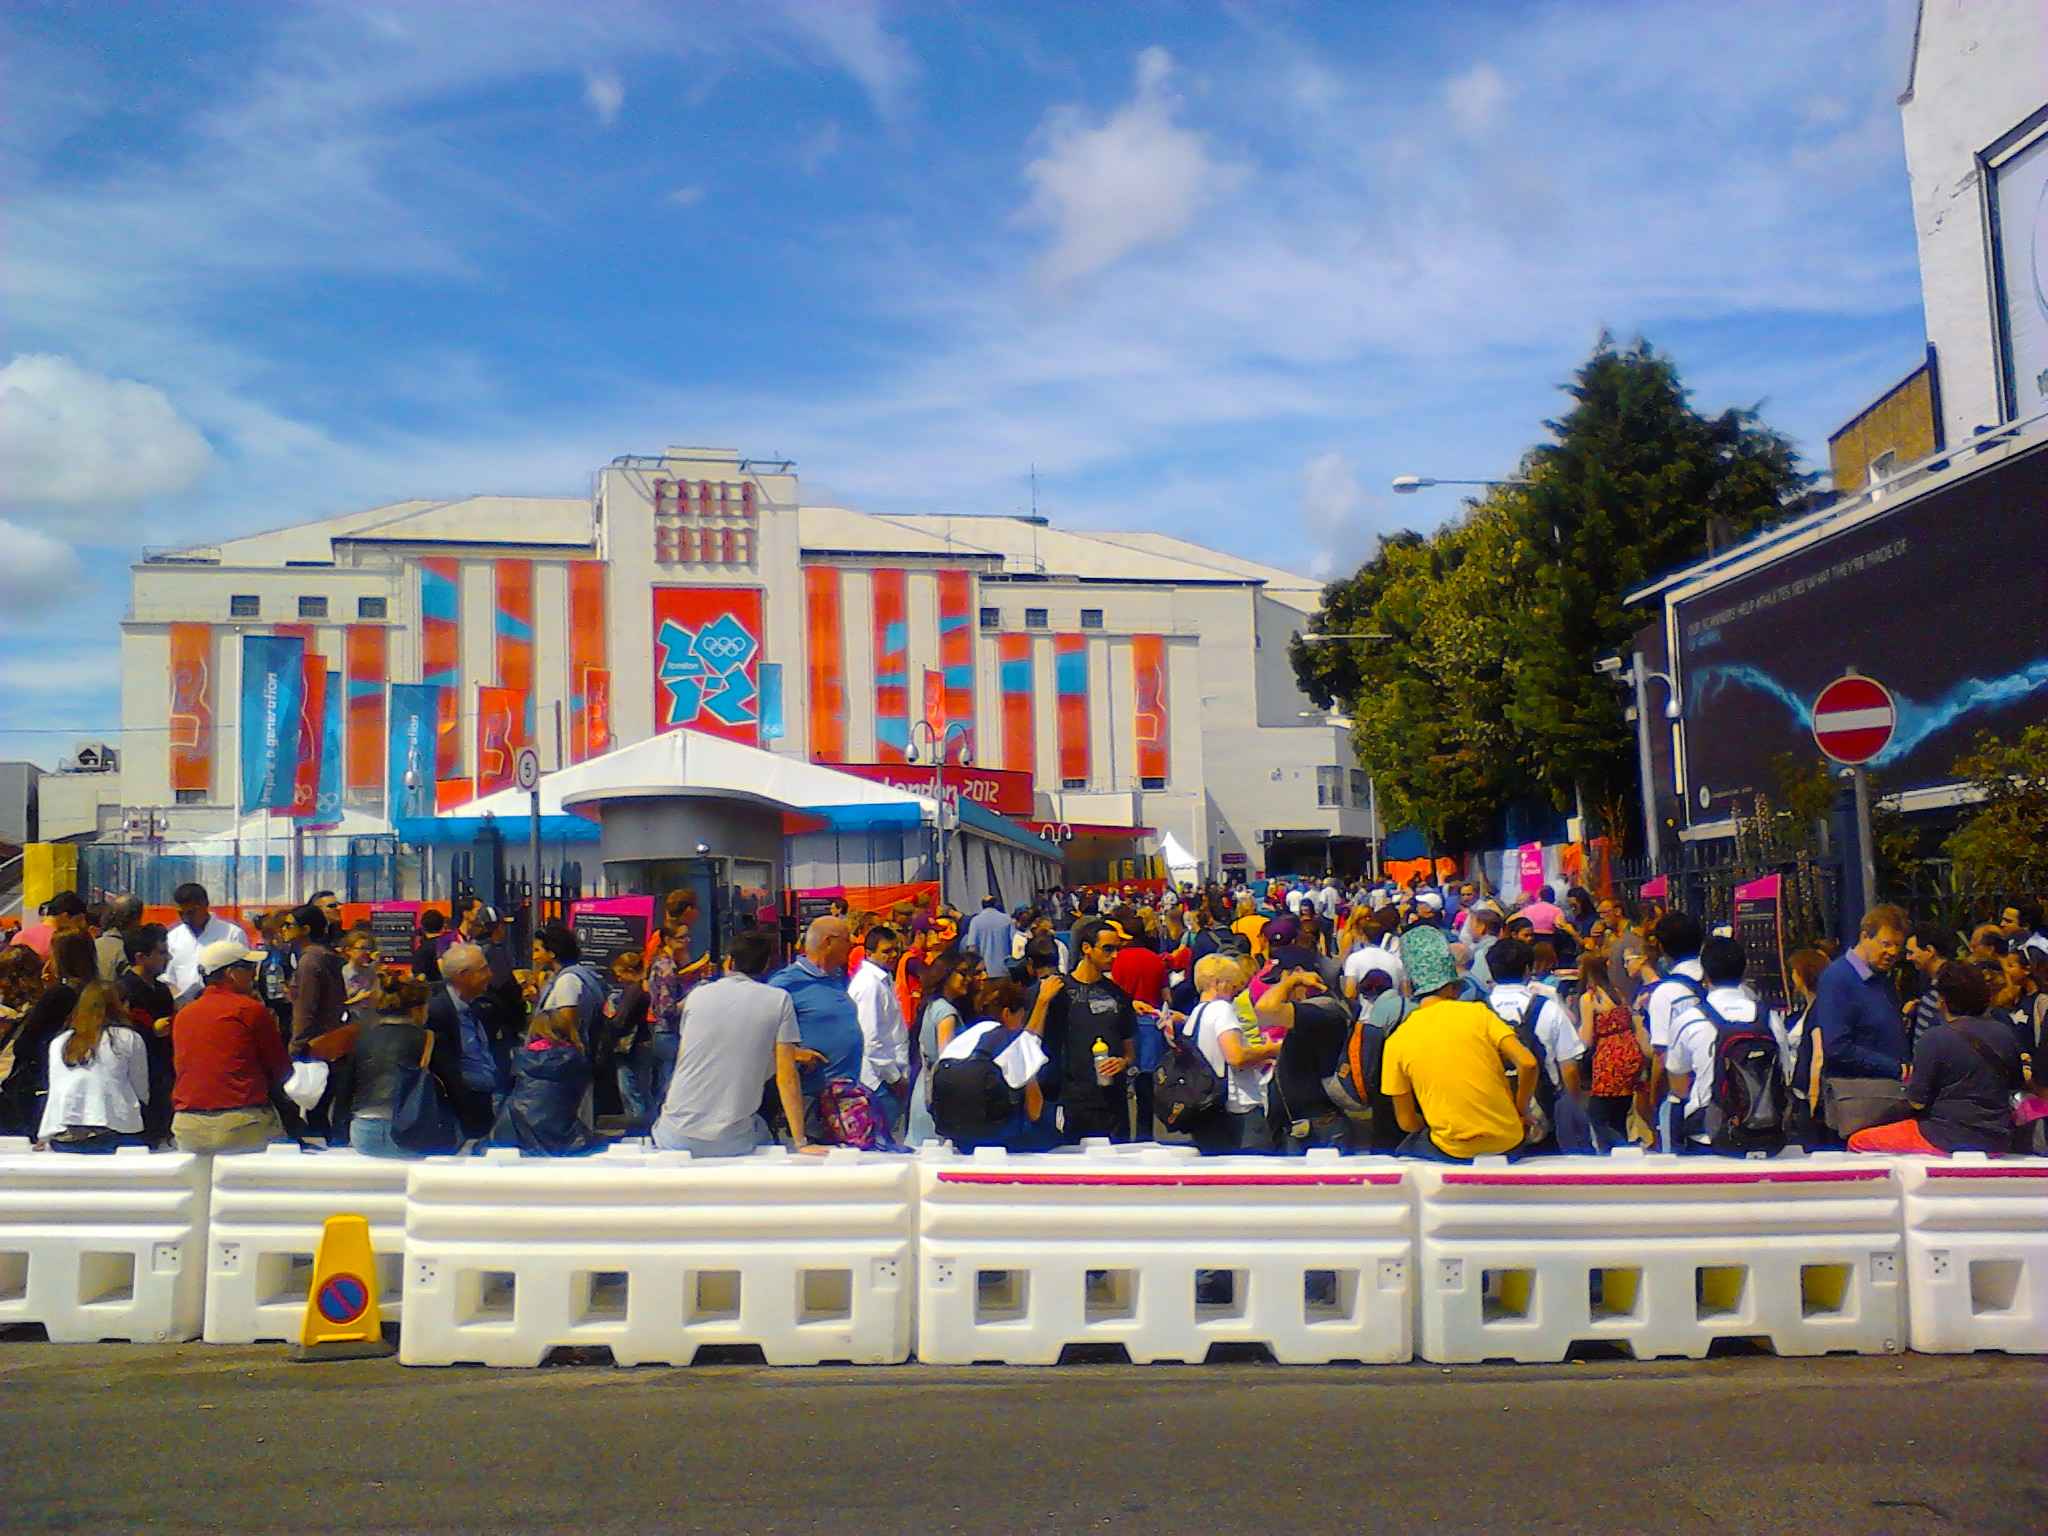 Outside of Earls Court, London Olympics - 3 Aug 2012